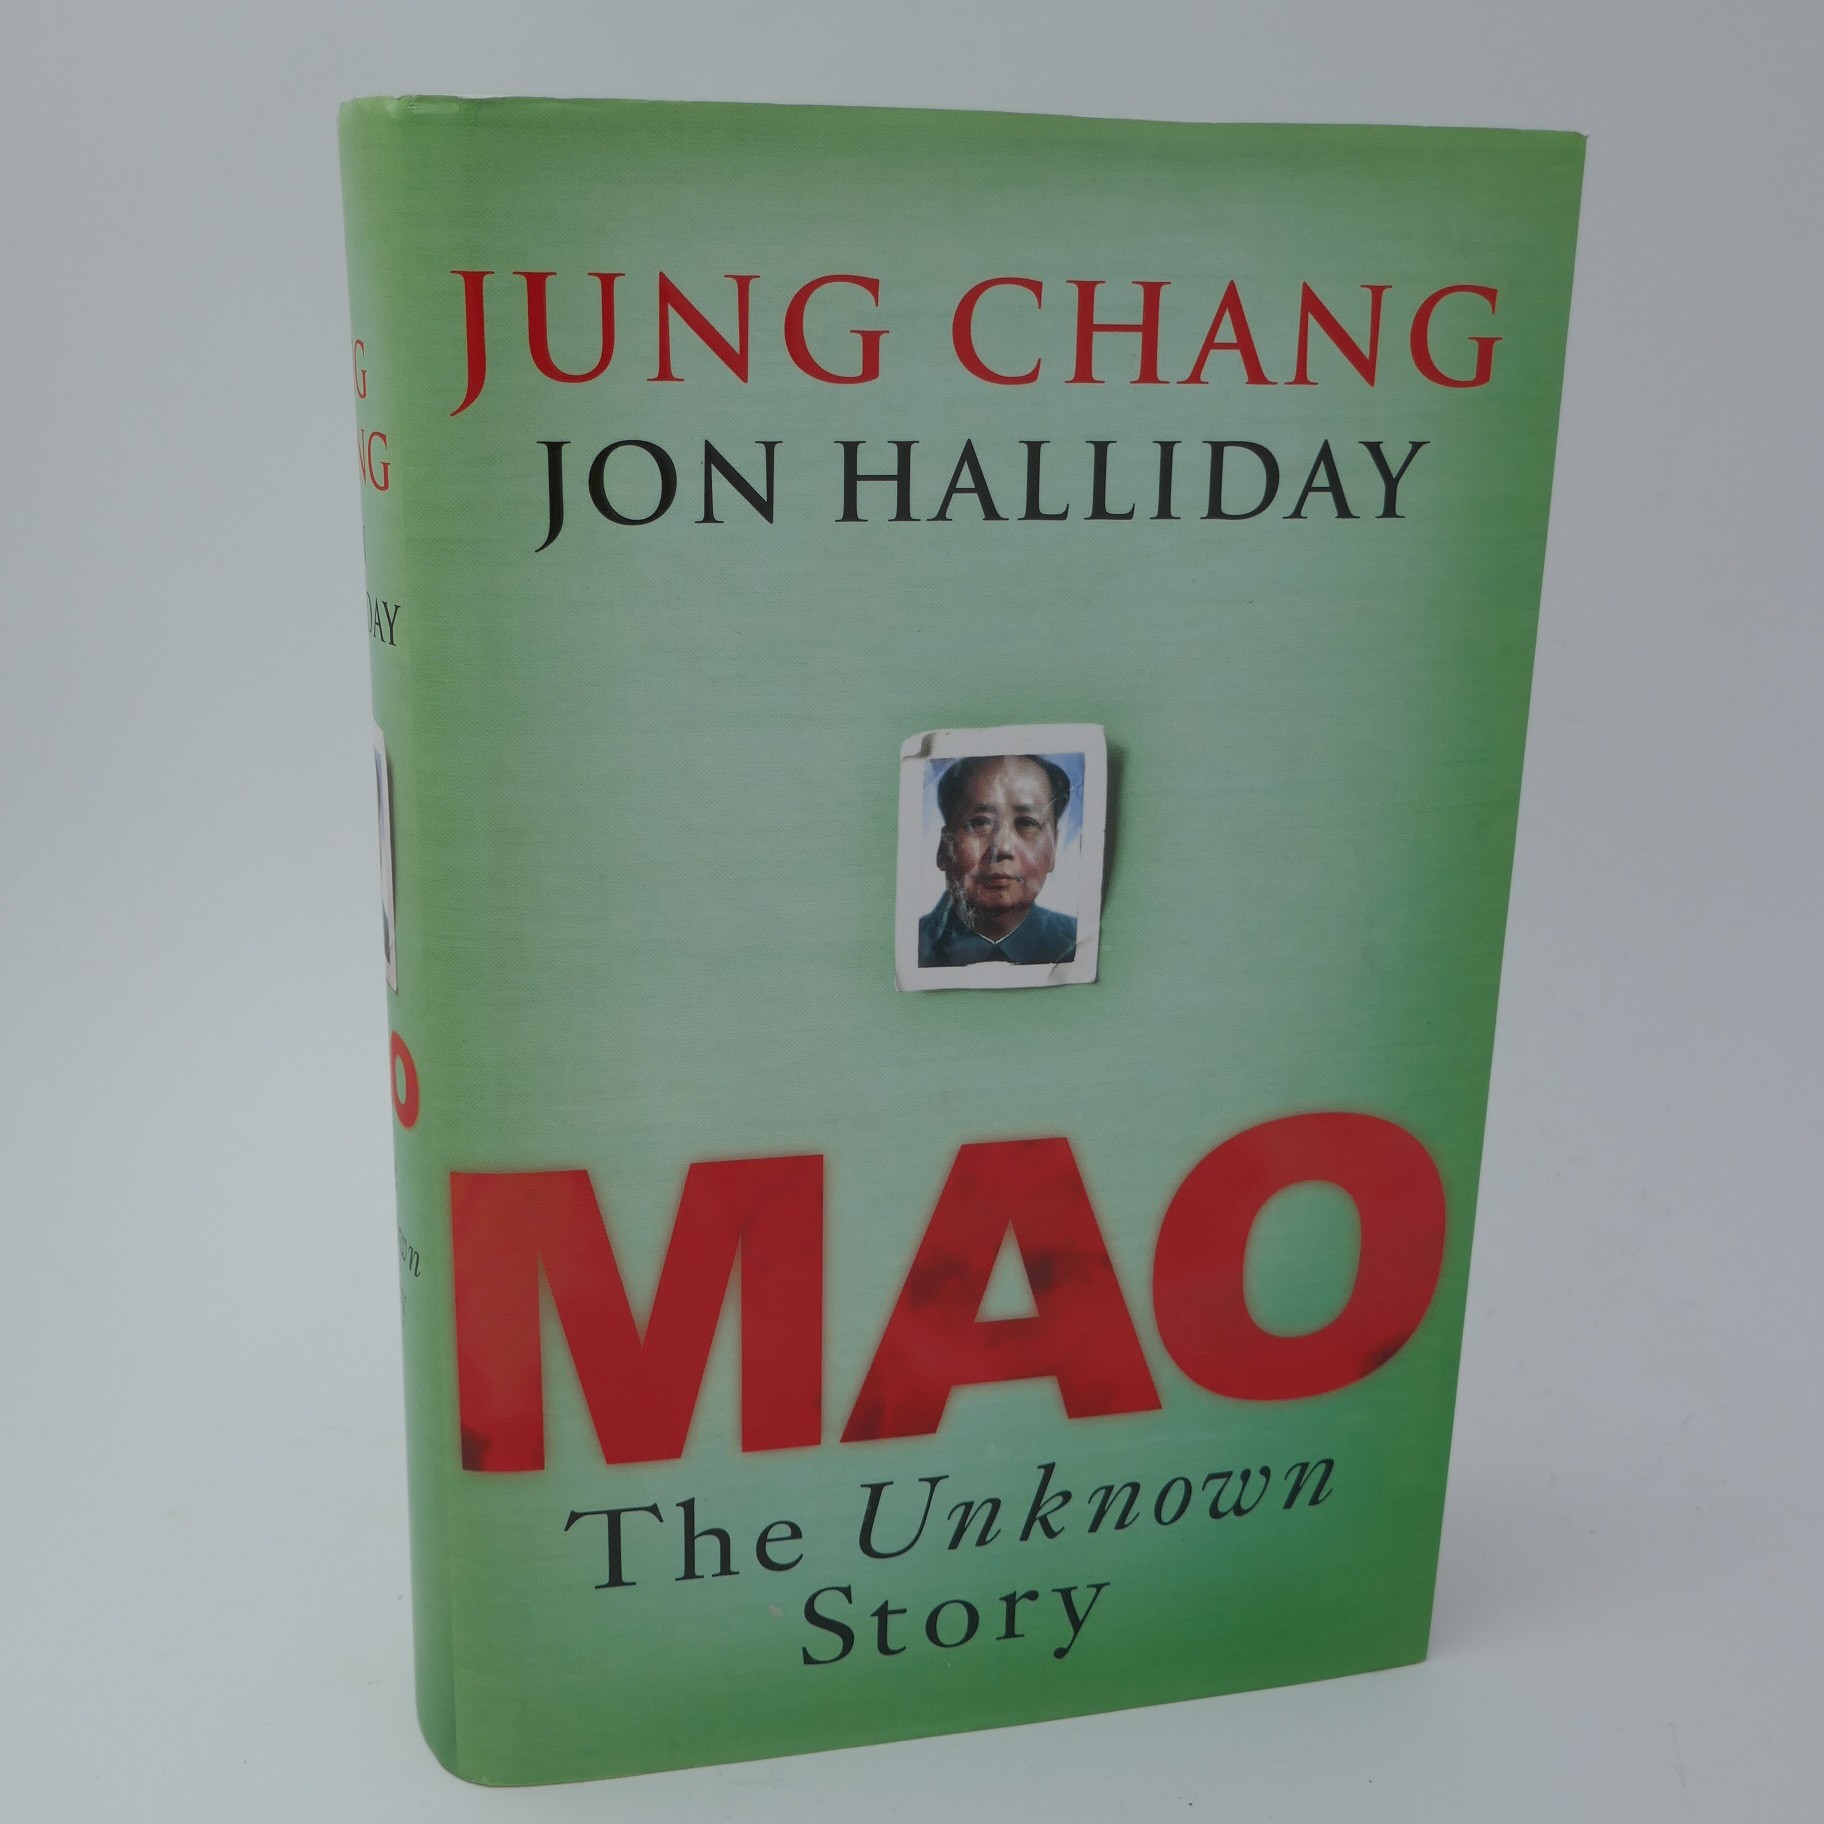 Mao　Signed　The　Story.　Rare　Unknown　Author　Ulysses　(2005)　Books